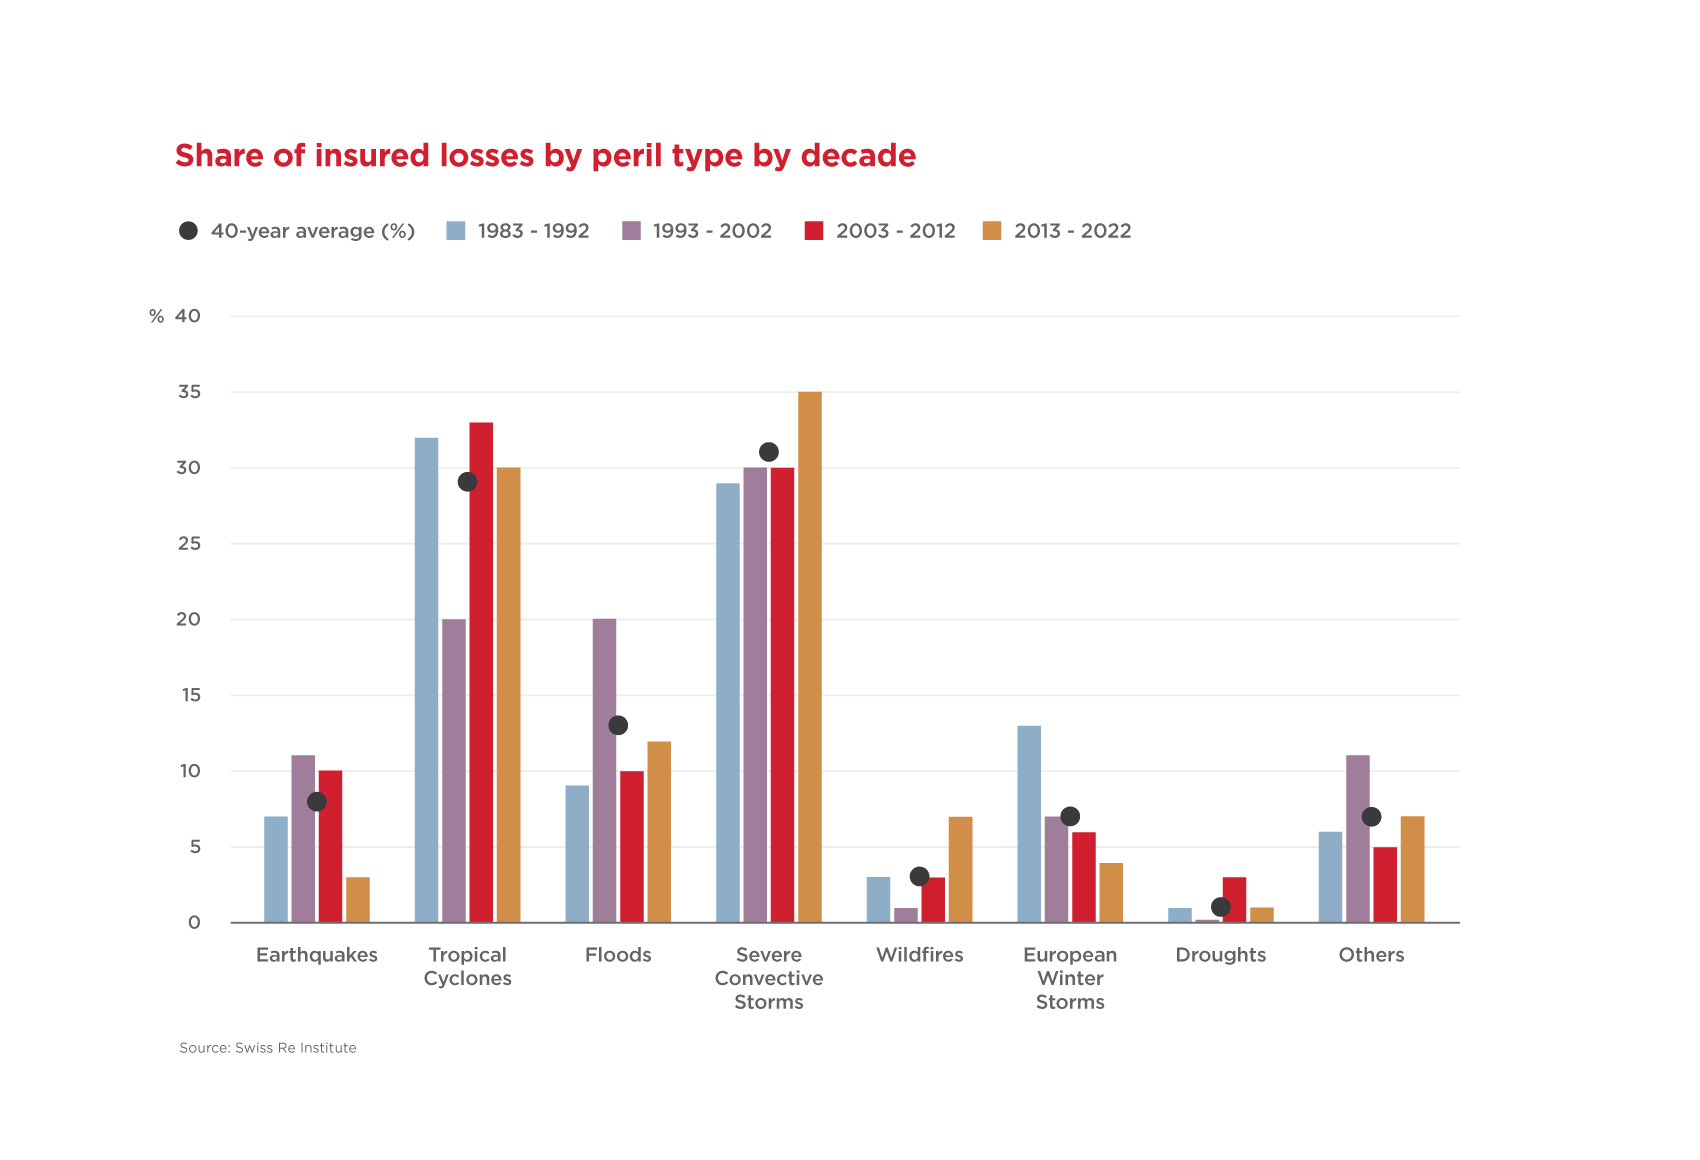 Share of Insured Losses by Peril Type by Decade